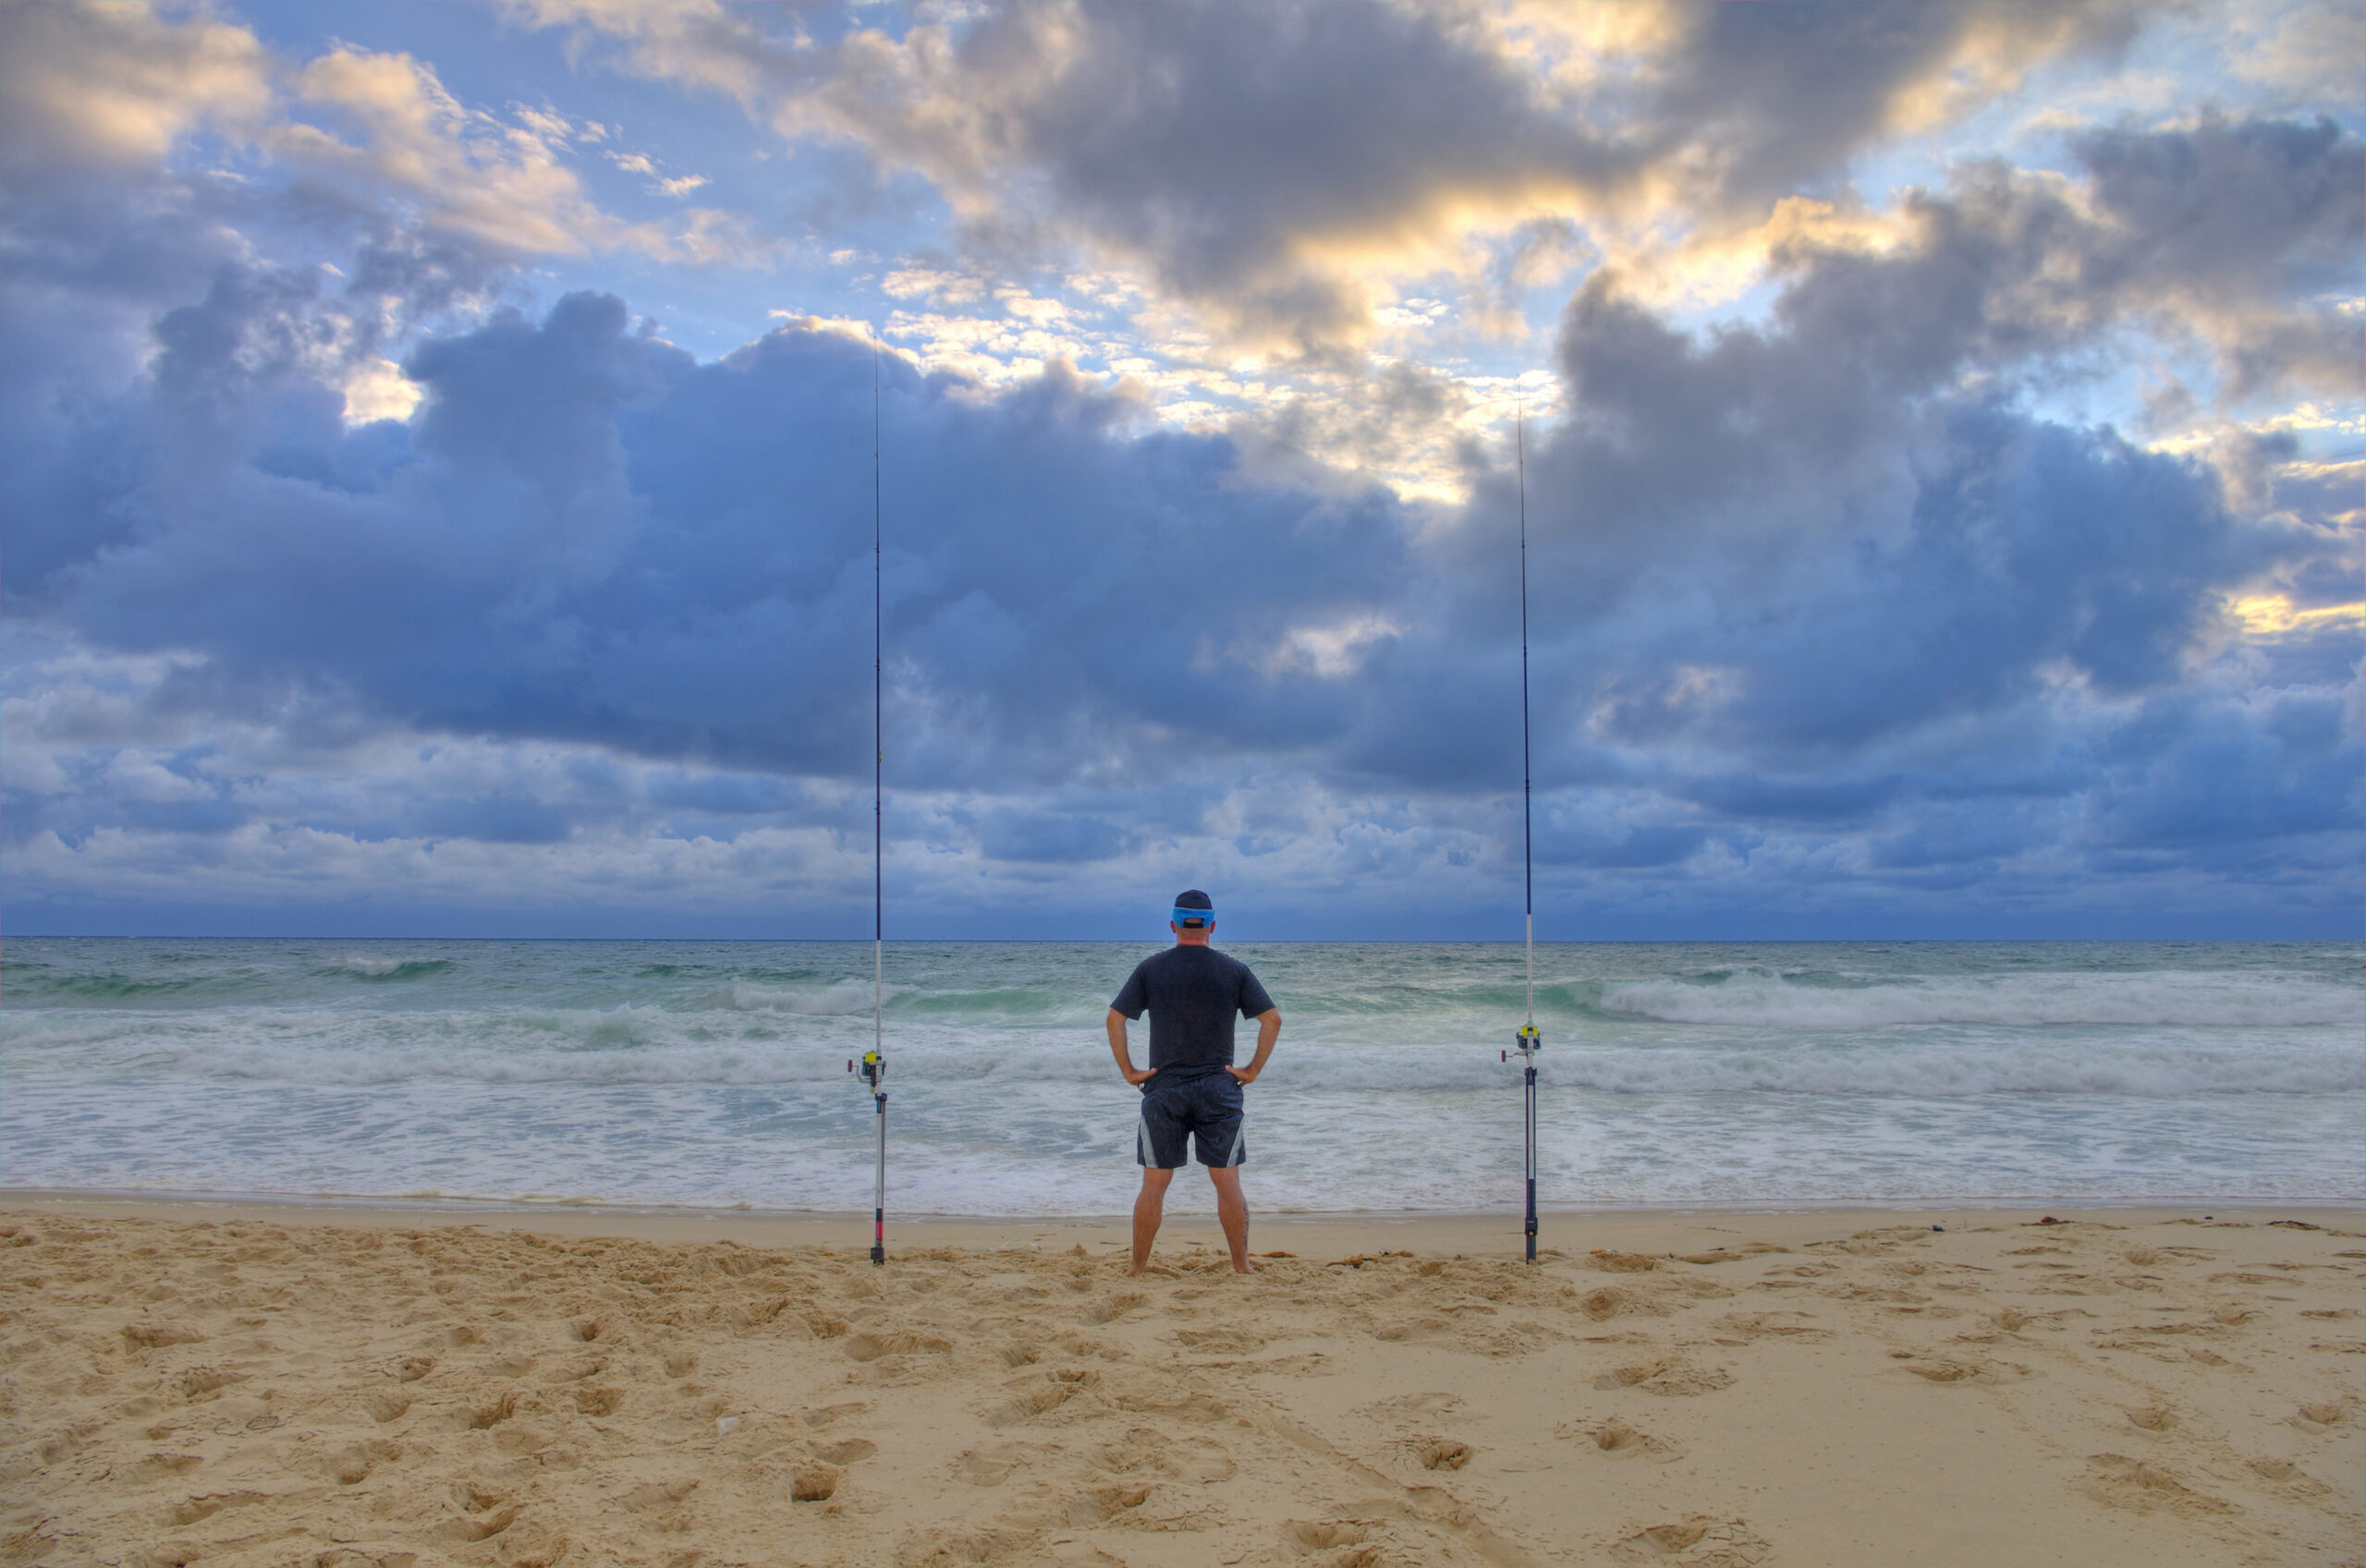 Surf fisherman waiting for fish on a beach